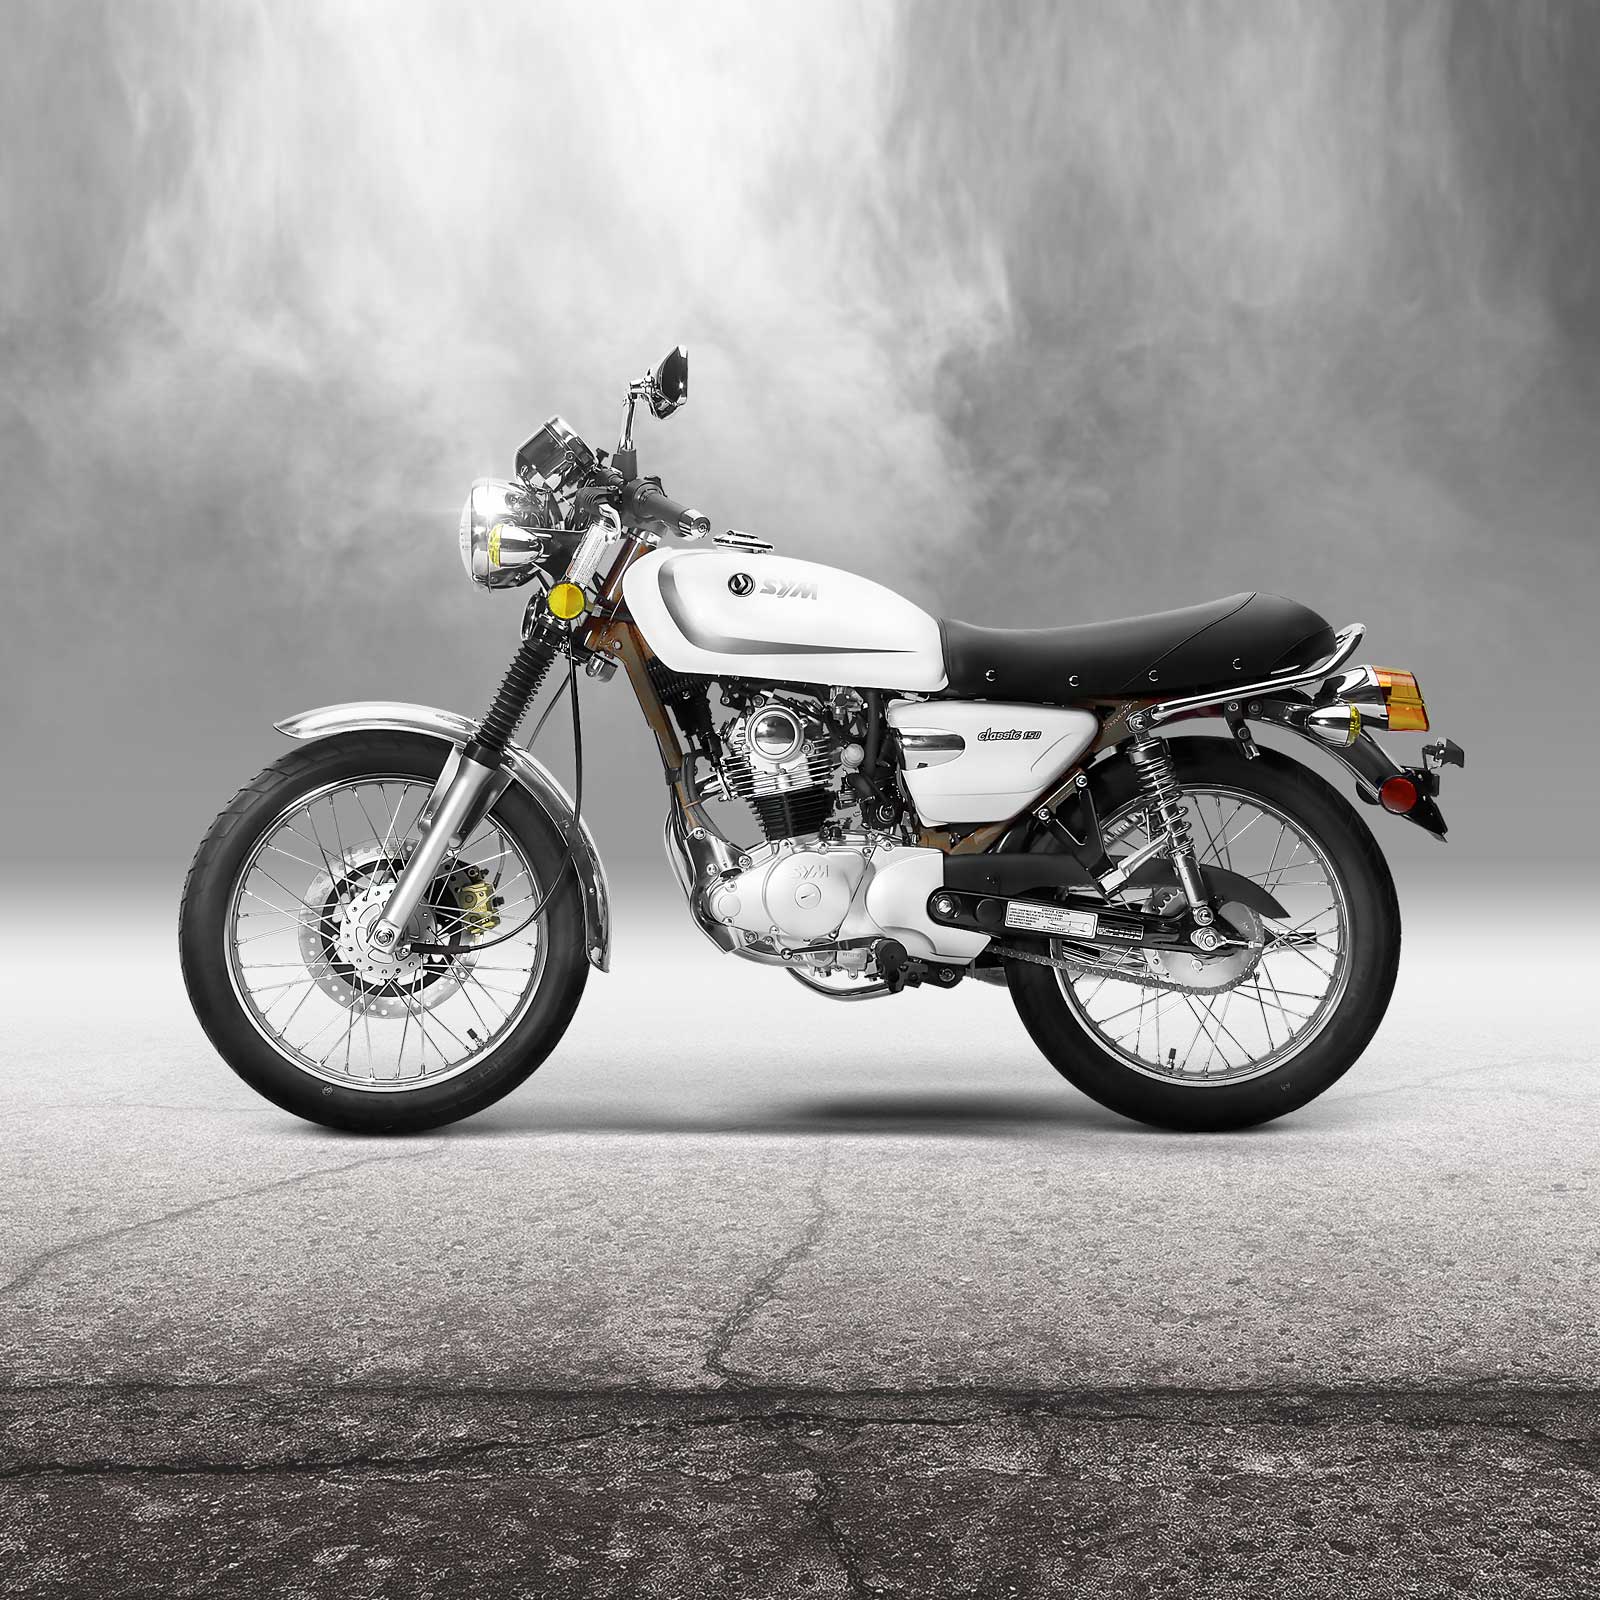 Wolf Classic 150 Reviewed by Motorcycle Classics